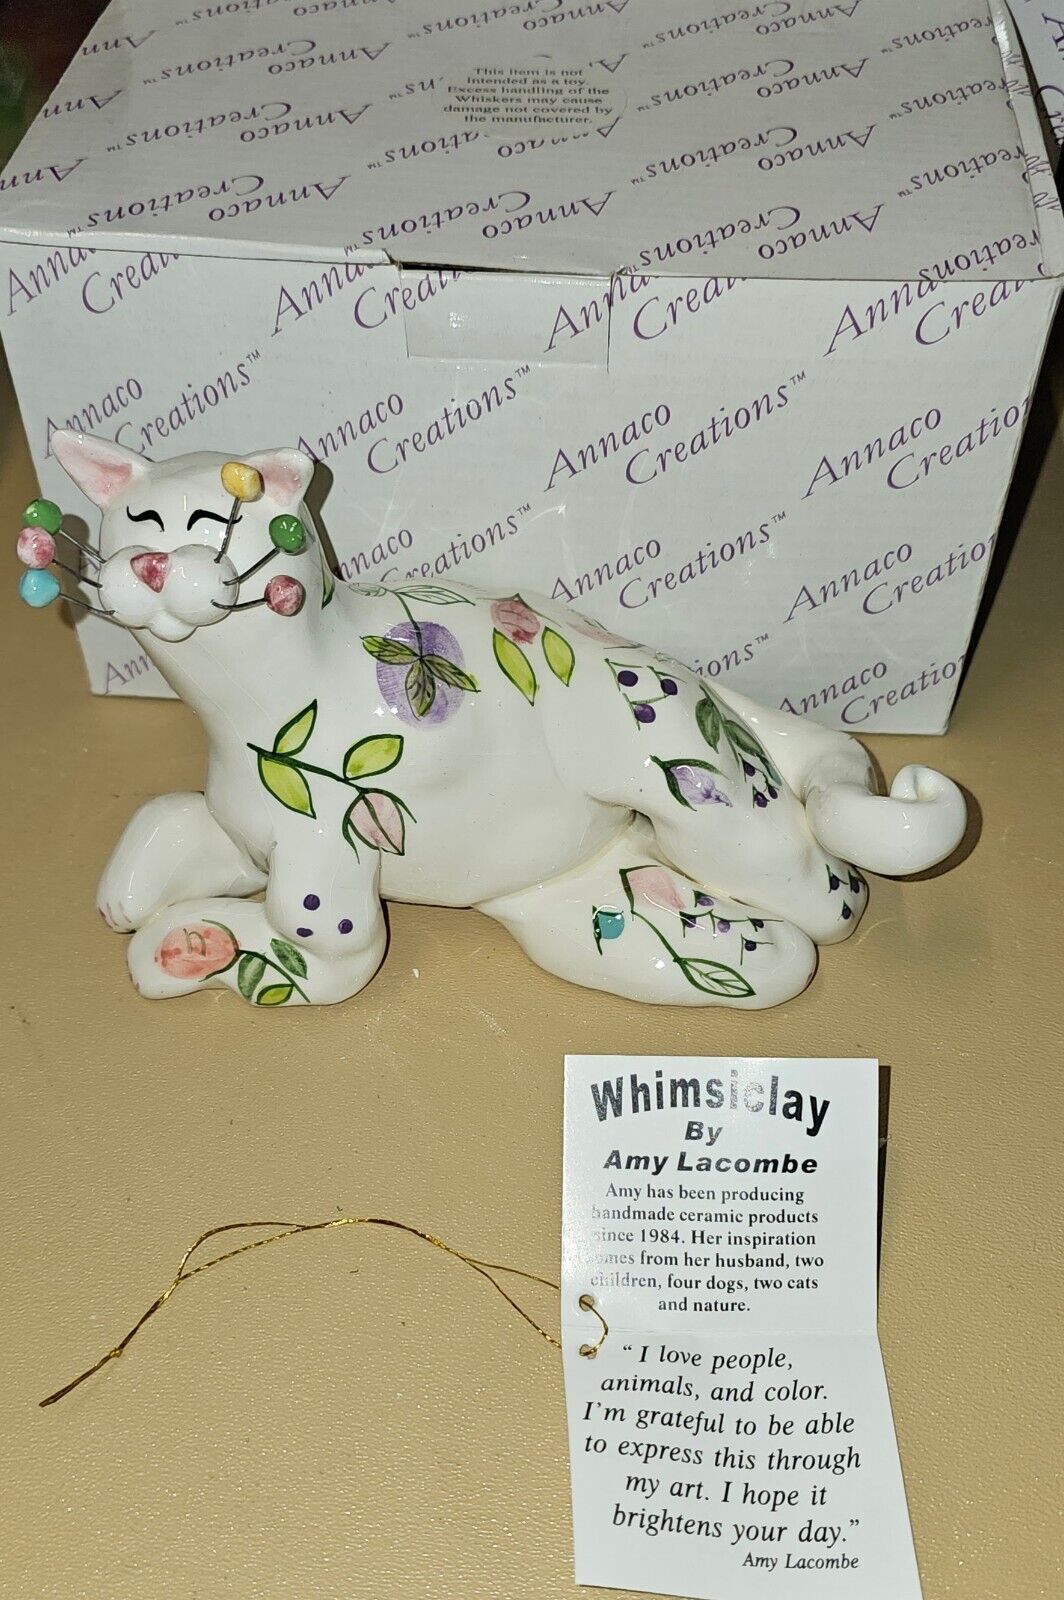 Annaco Creations Amy Lacombe WHIMSICLAY Cat Figurine with Flower decorations NIB